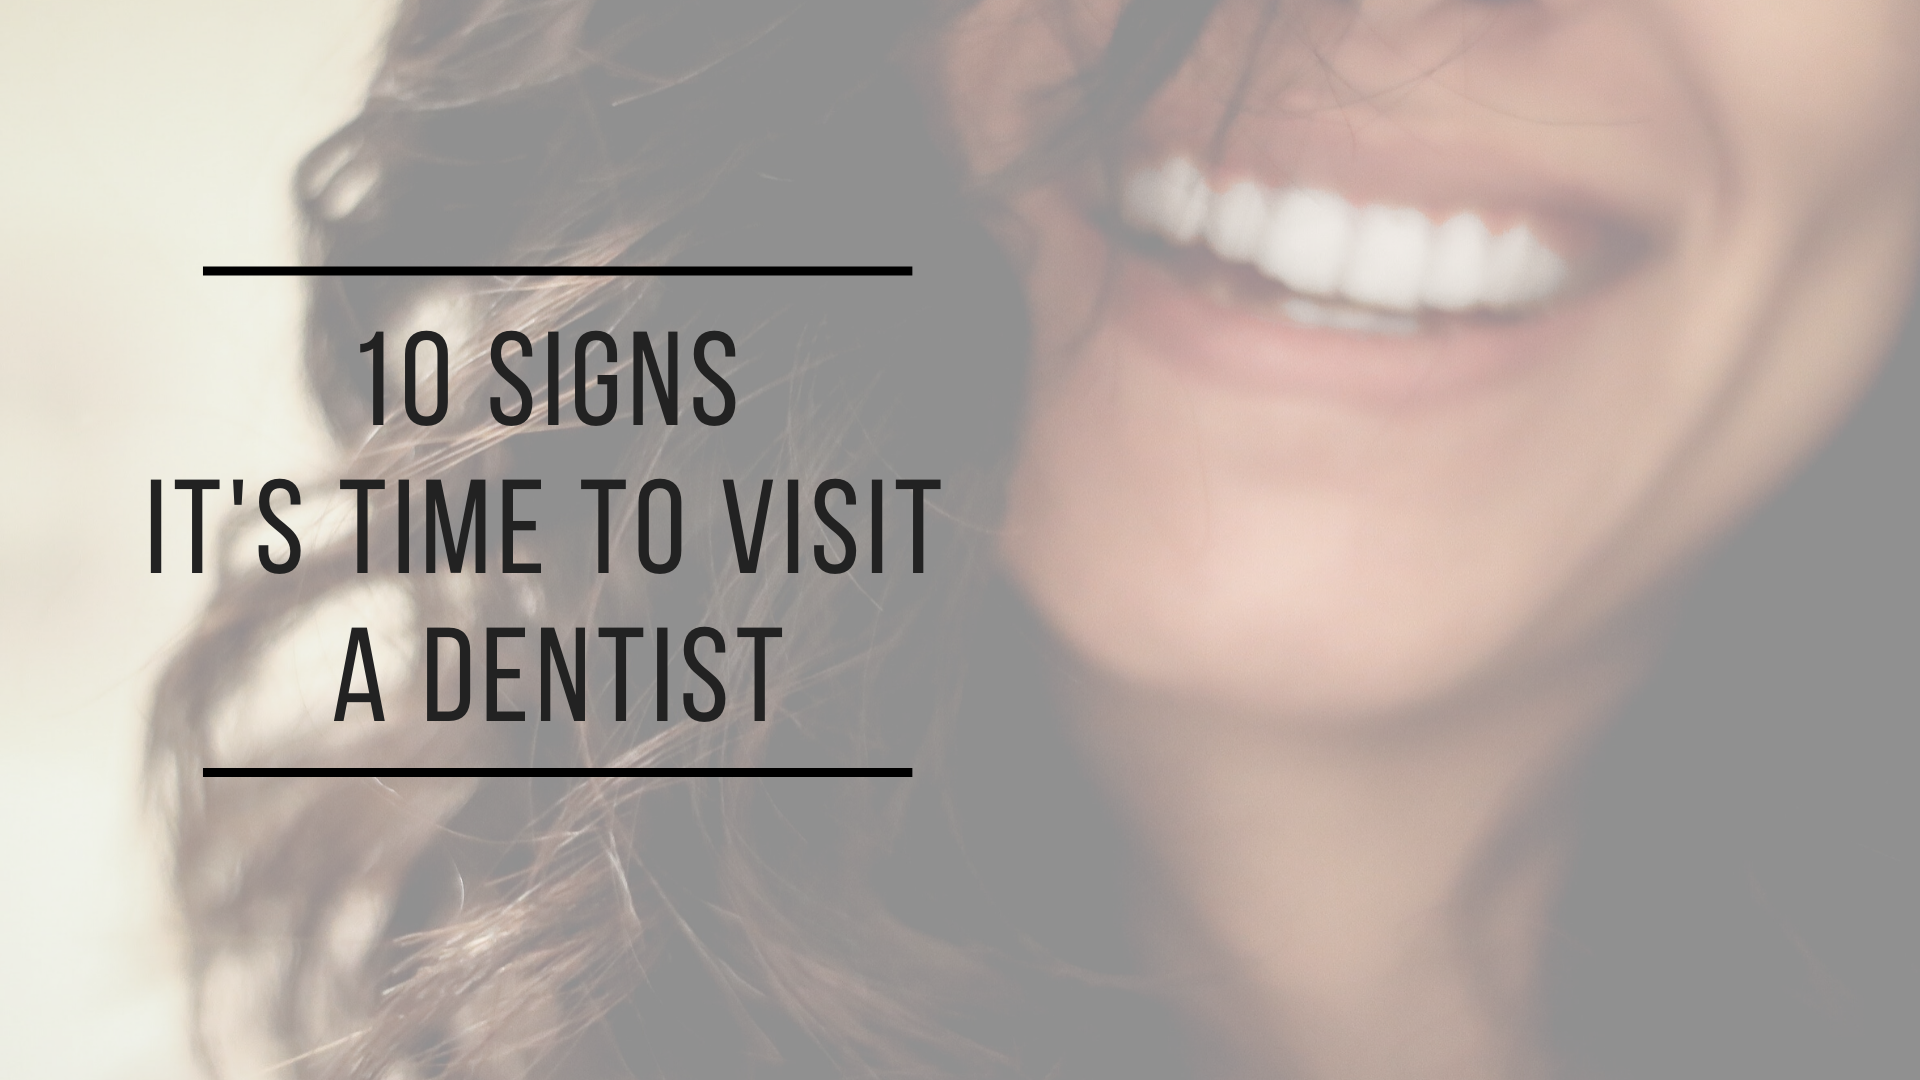 When to Visit a Dentist